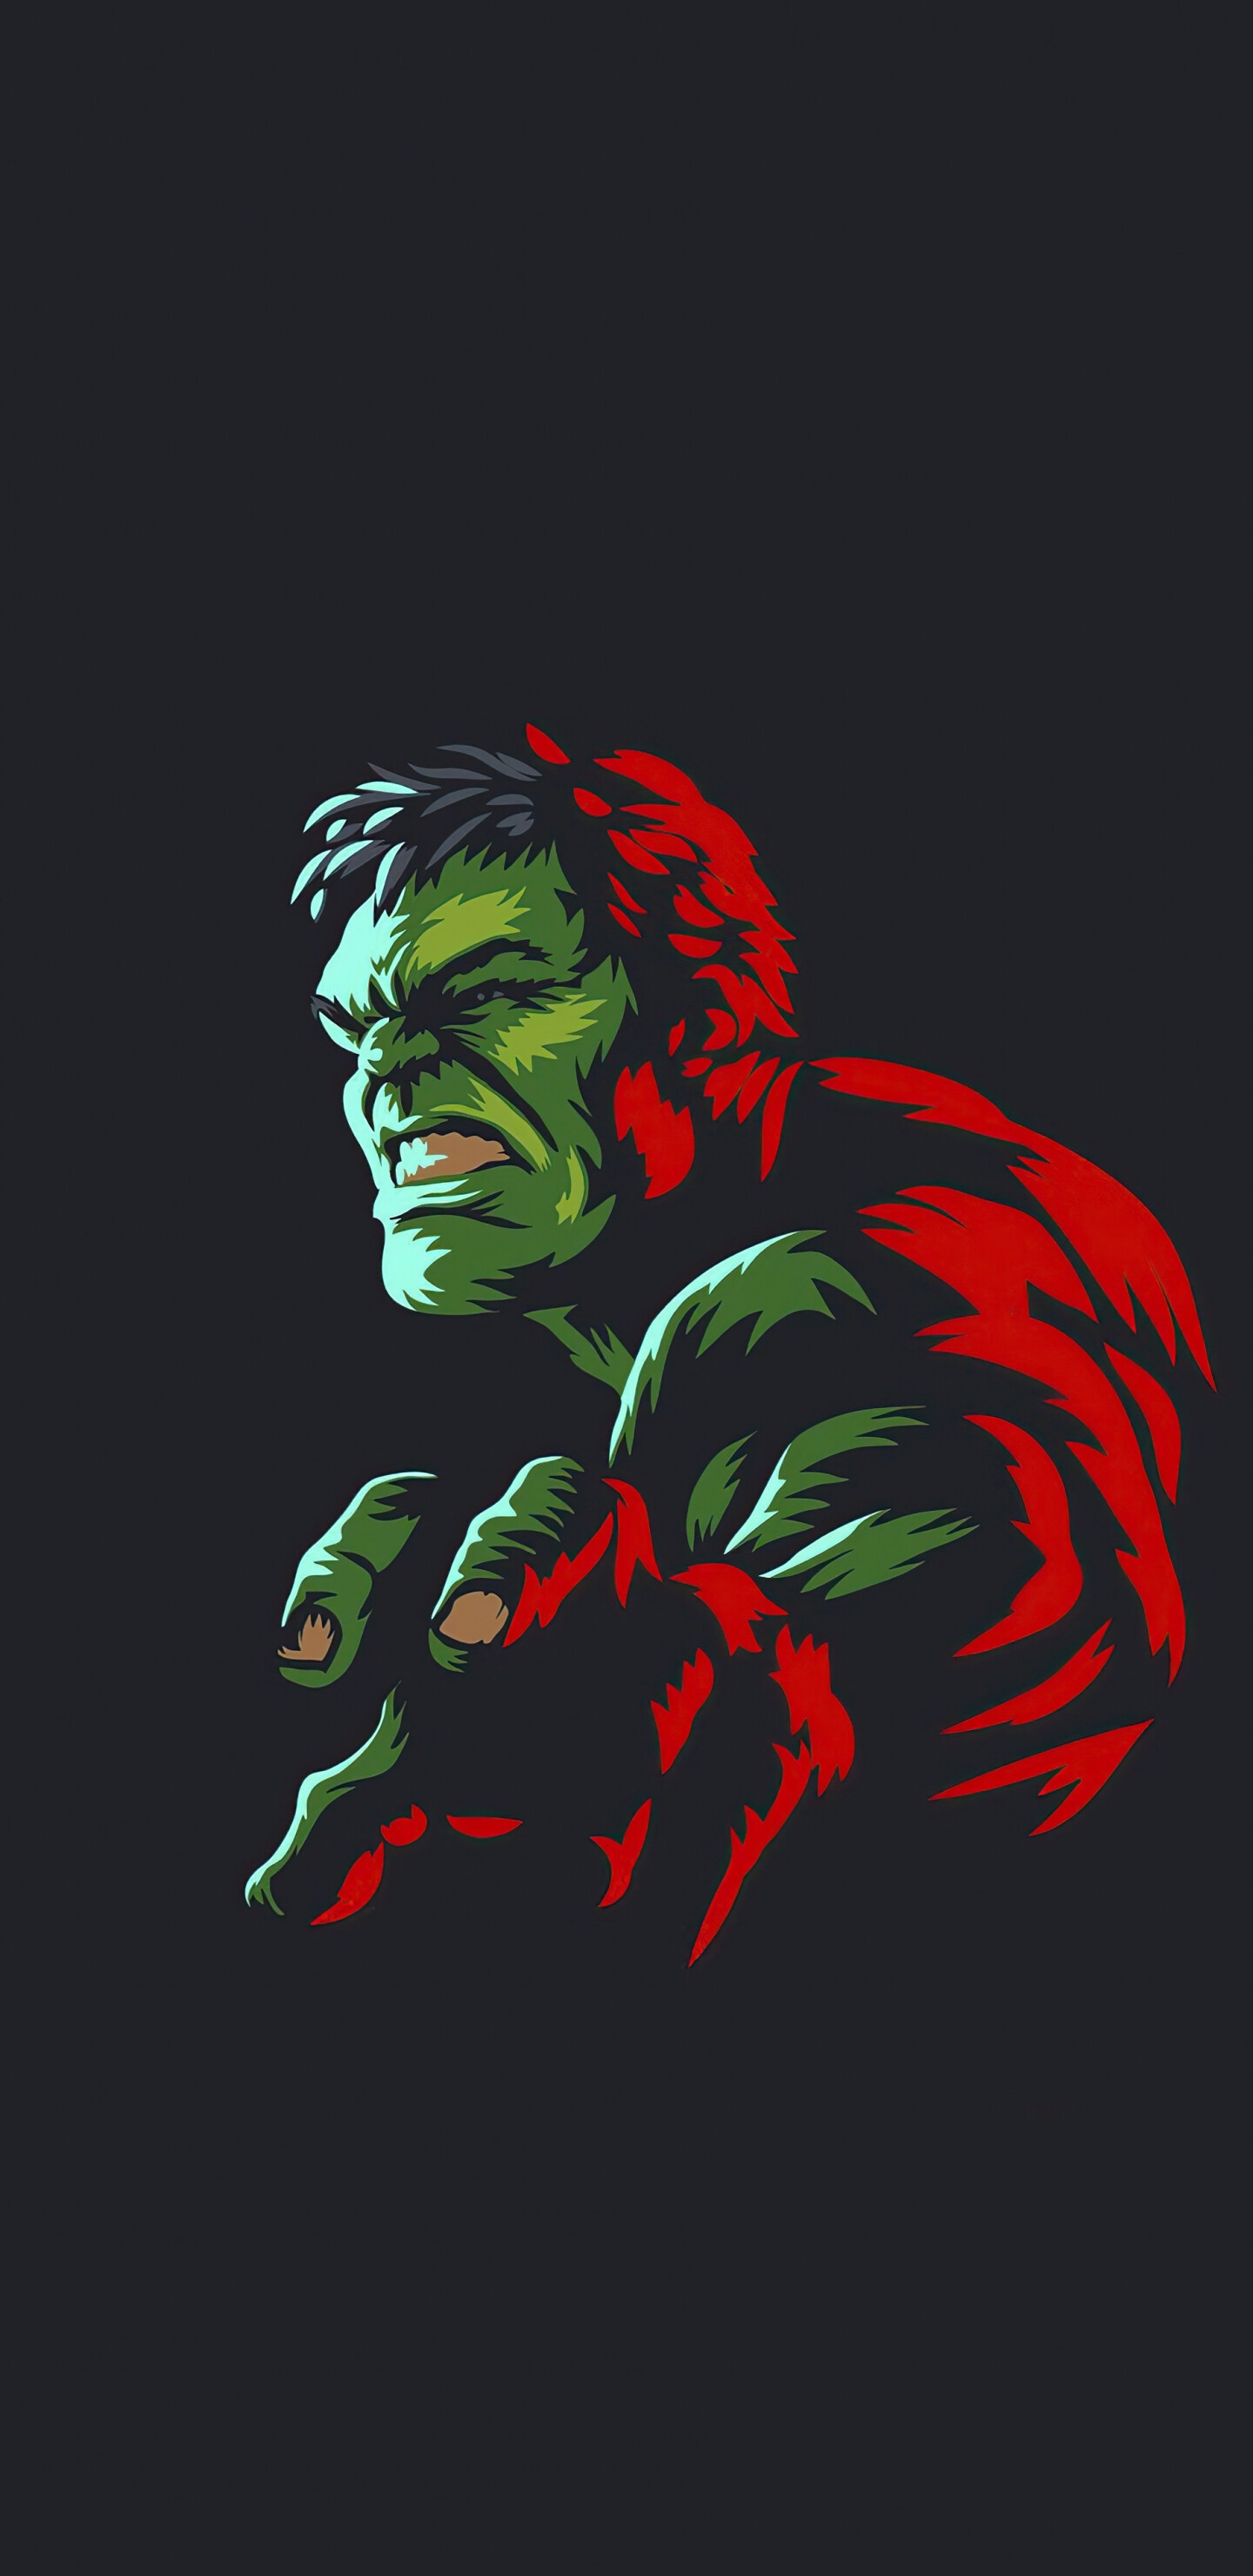 Hulk: Minimal art, Marvel hero, Featured in several animated television series from the 1960s onward. 1440x2960 HD Background.